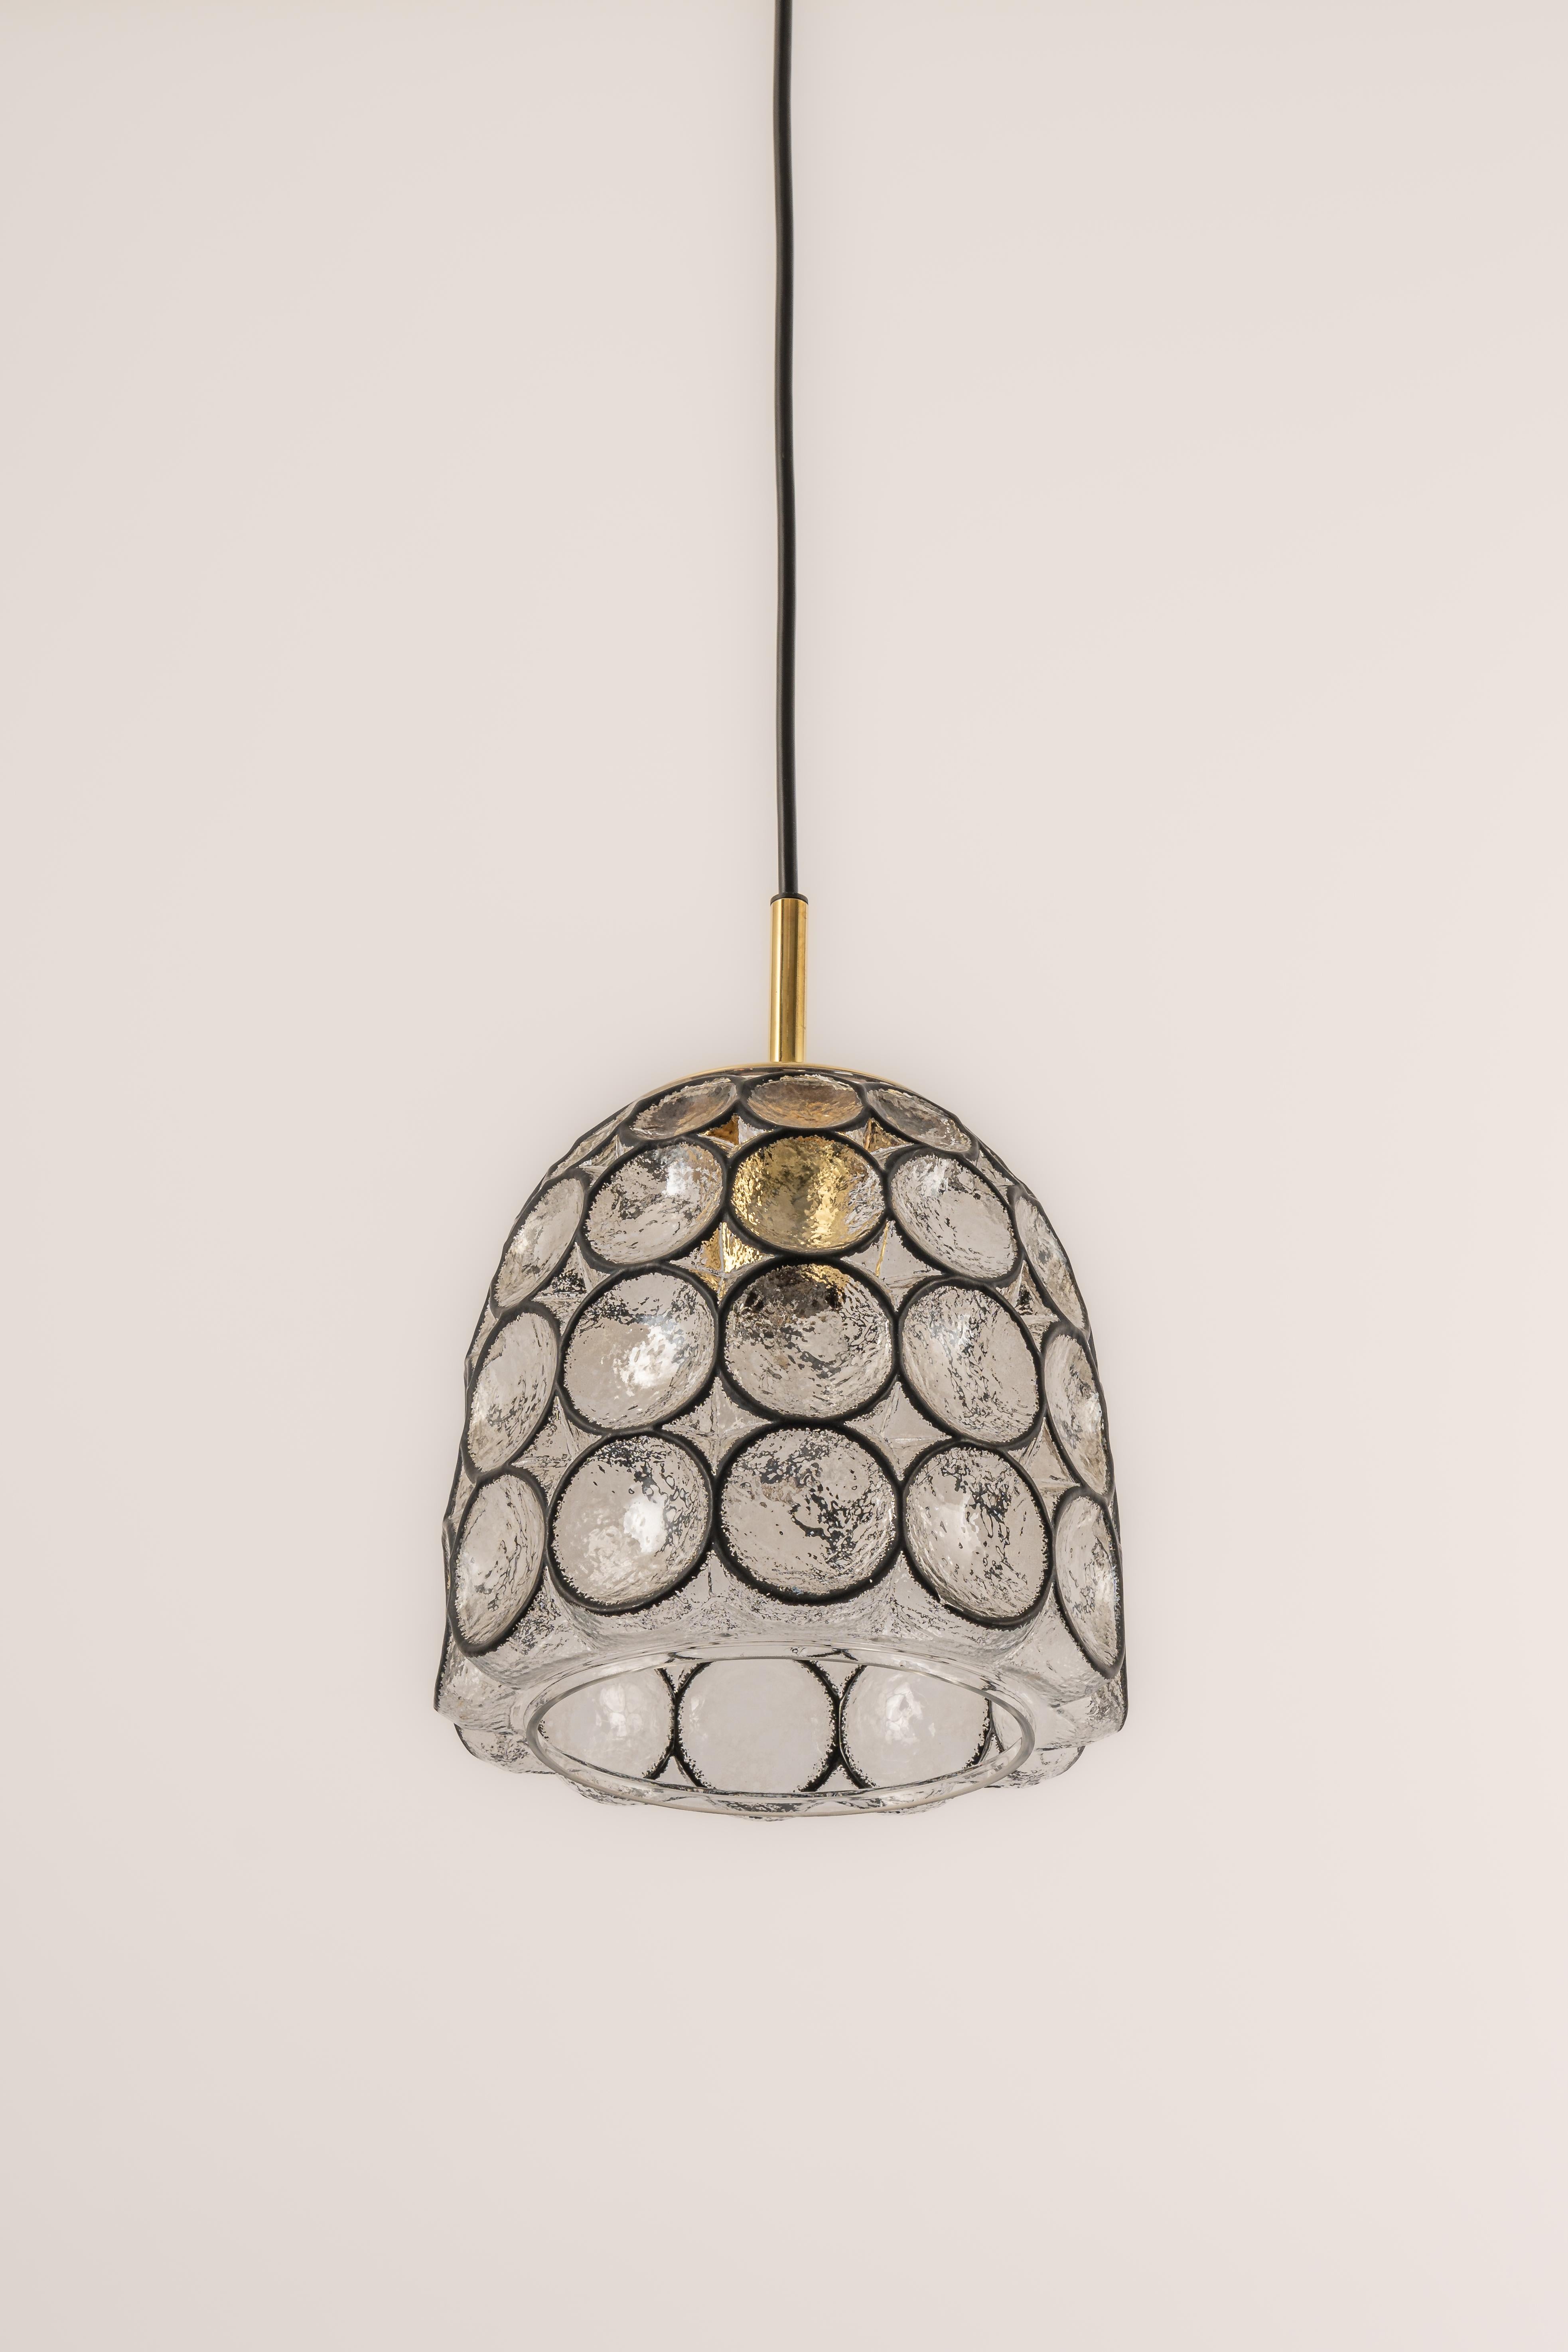 1 of 4 Petite Iron and Clear Glass Pendant Lights by Limburg, Germany, 1960s For Sale 1